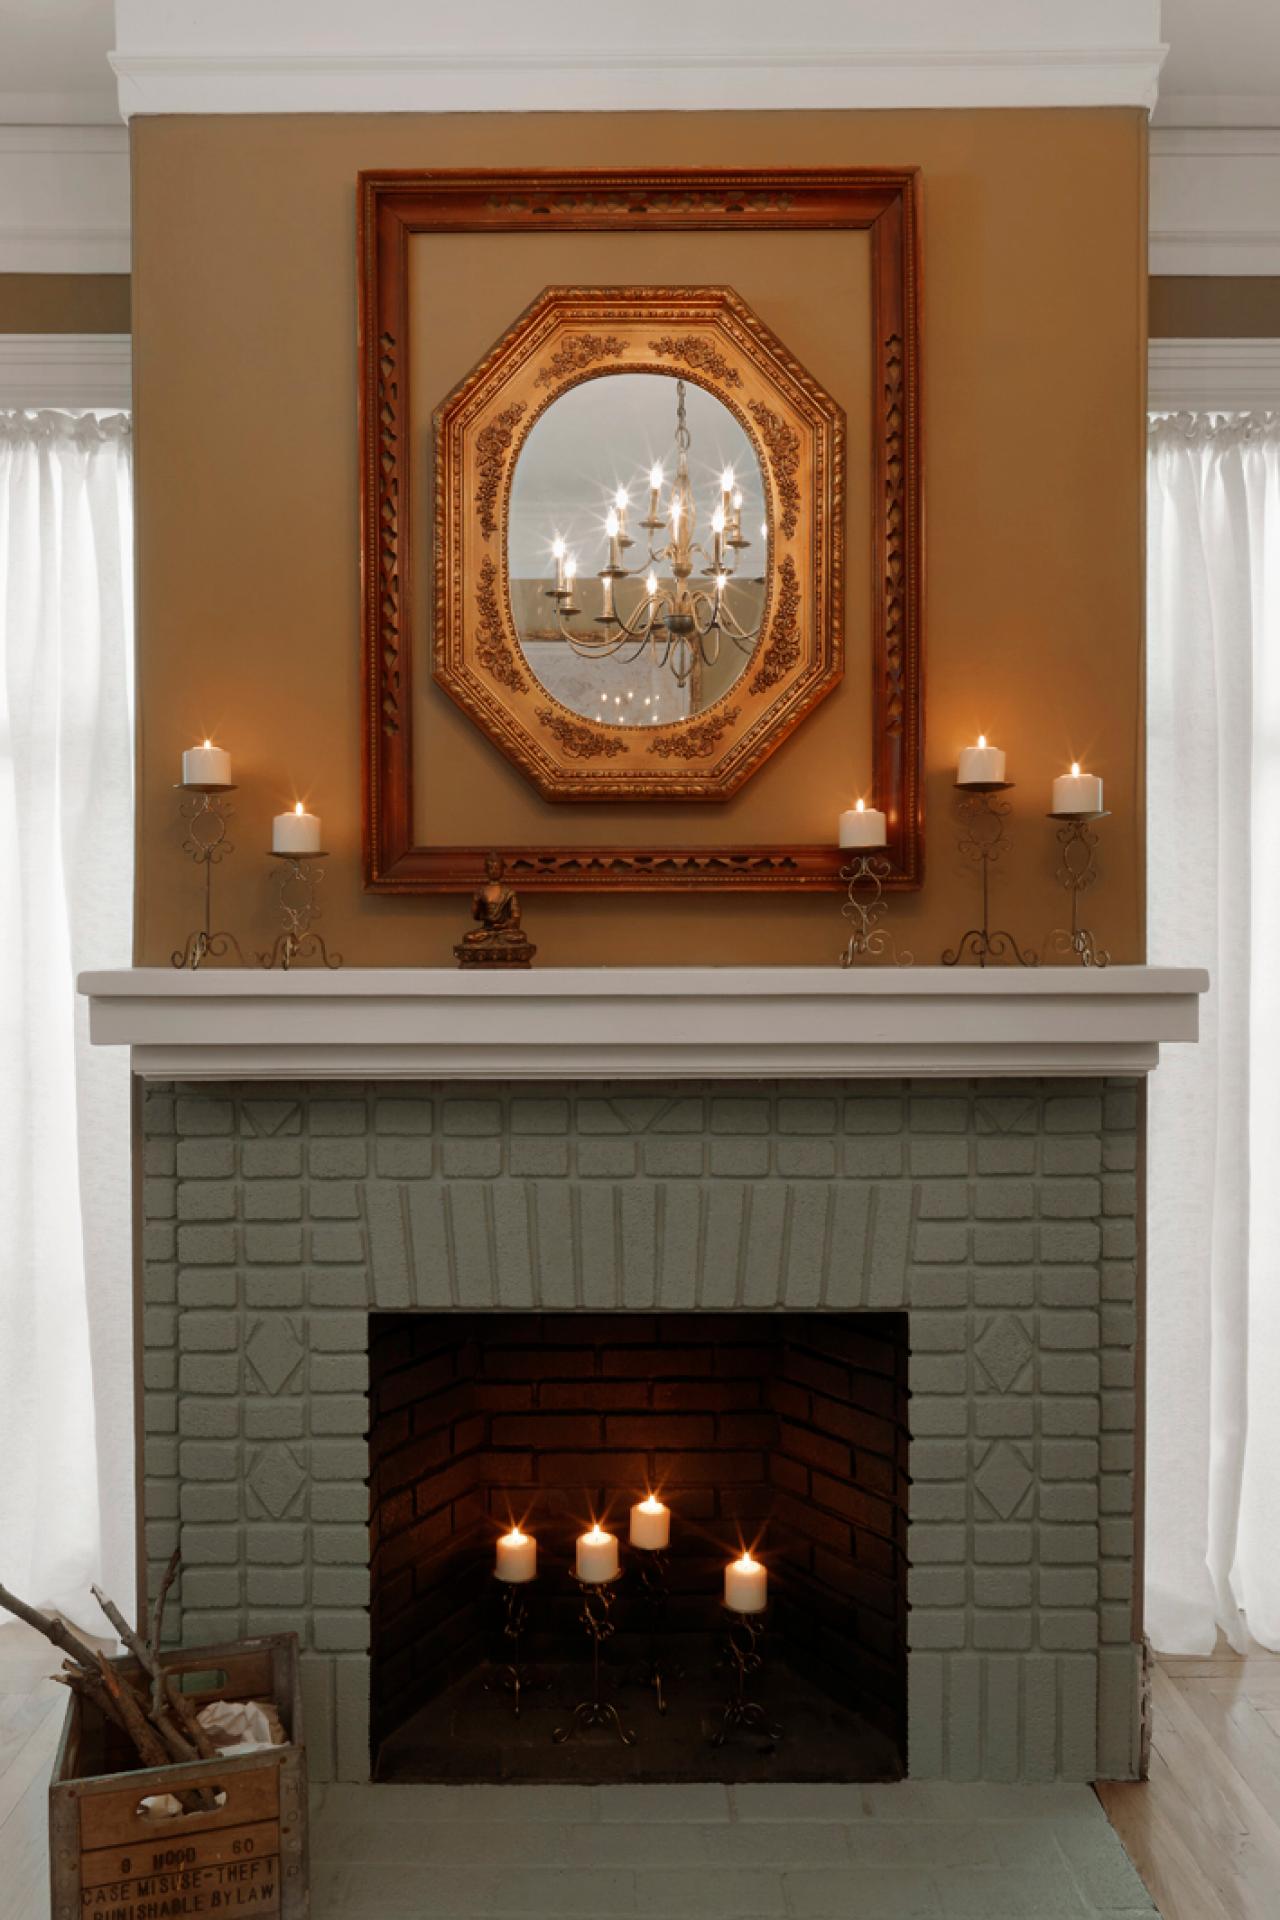 Painted Brick Fireplace Makeover How, Diy Brick Fireplace Makeover